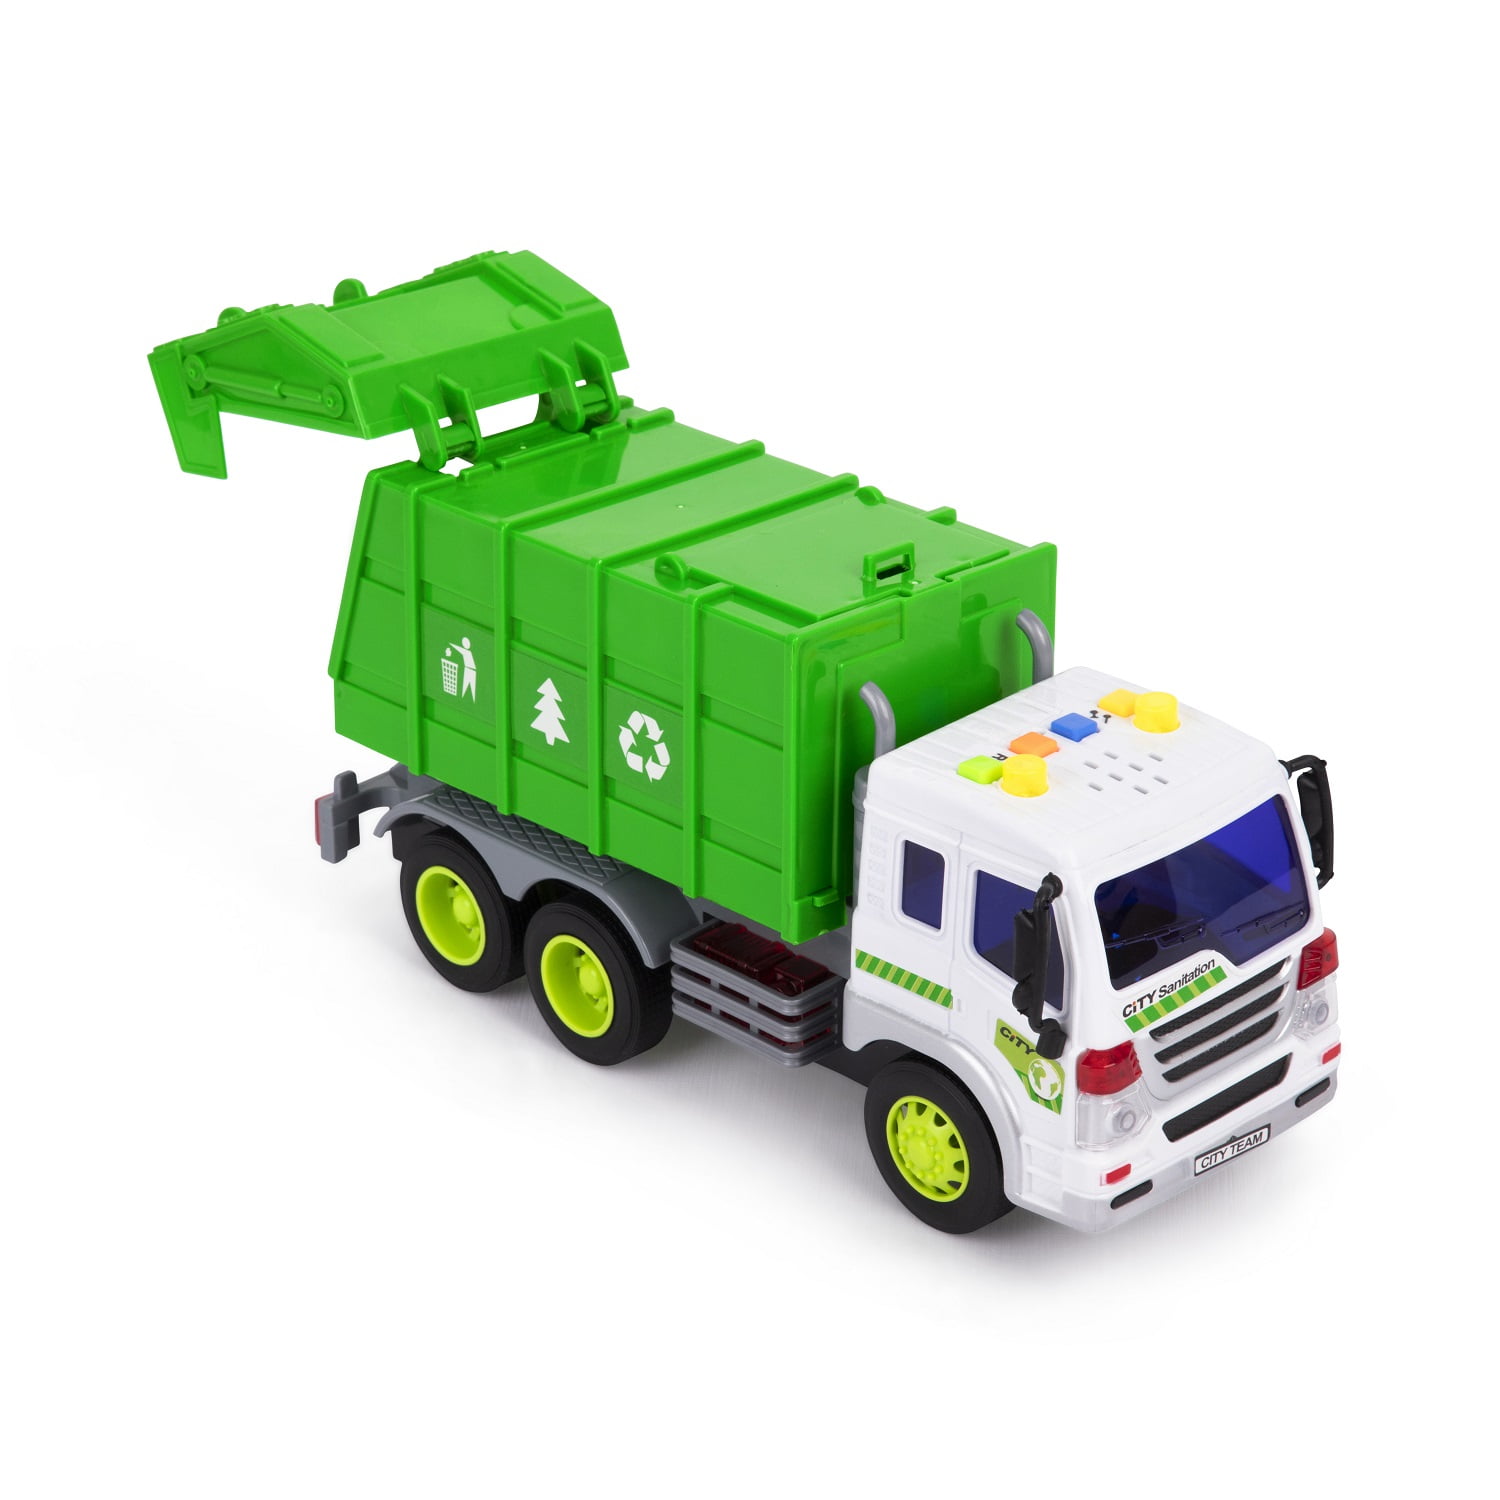 New Click N' Play Friction Kids Garbage Truck Toy Recycle Vehicle Trash Can Bin 